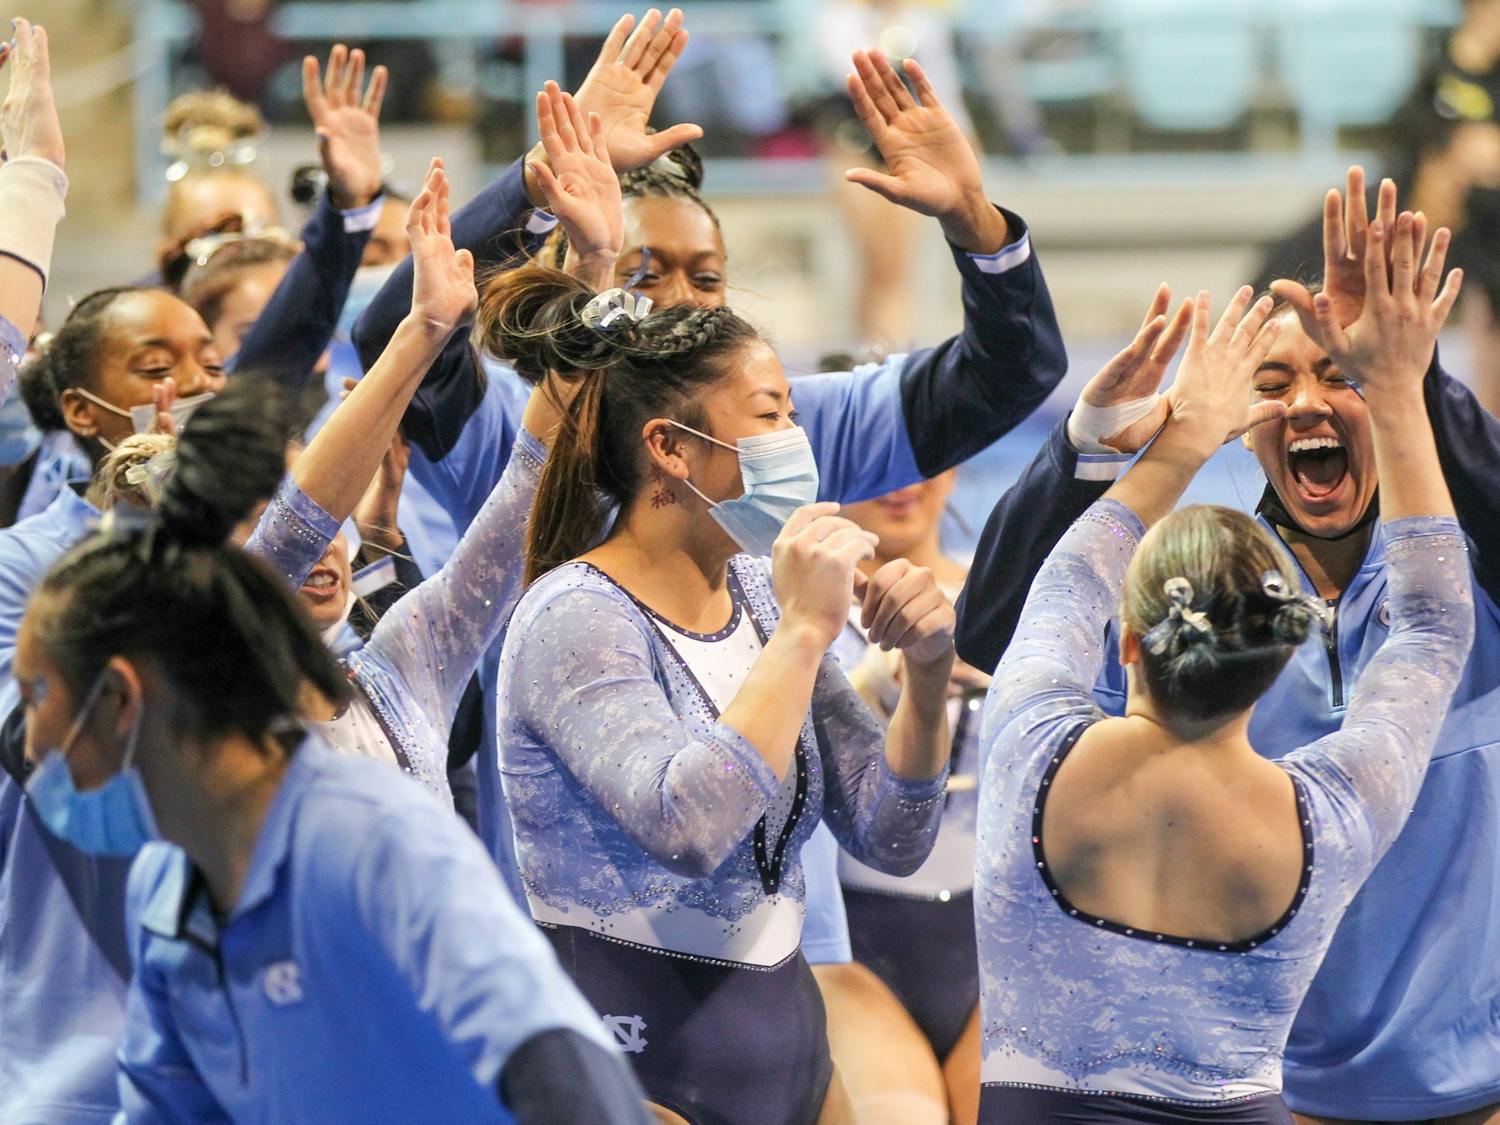 The team celebrates a successful vault by junior Jay Weil during UNC gymnastics' home meet on Saturday, Jan. 22, 2022, at Carmichael Arena.